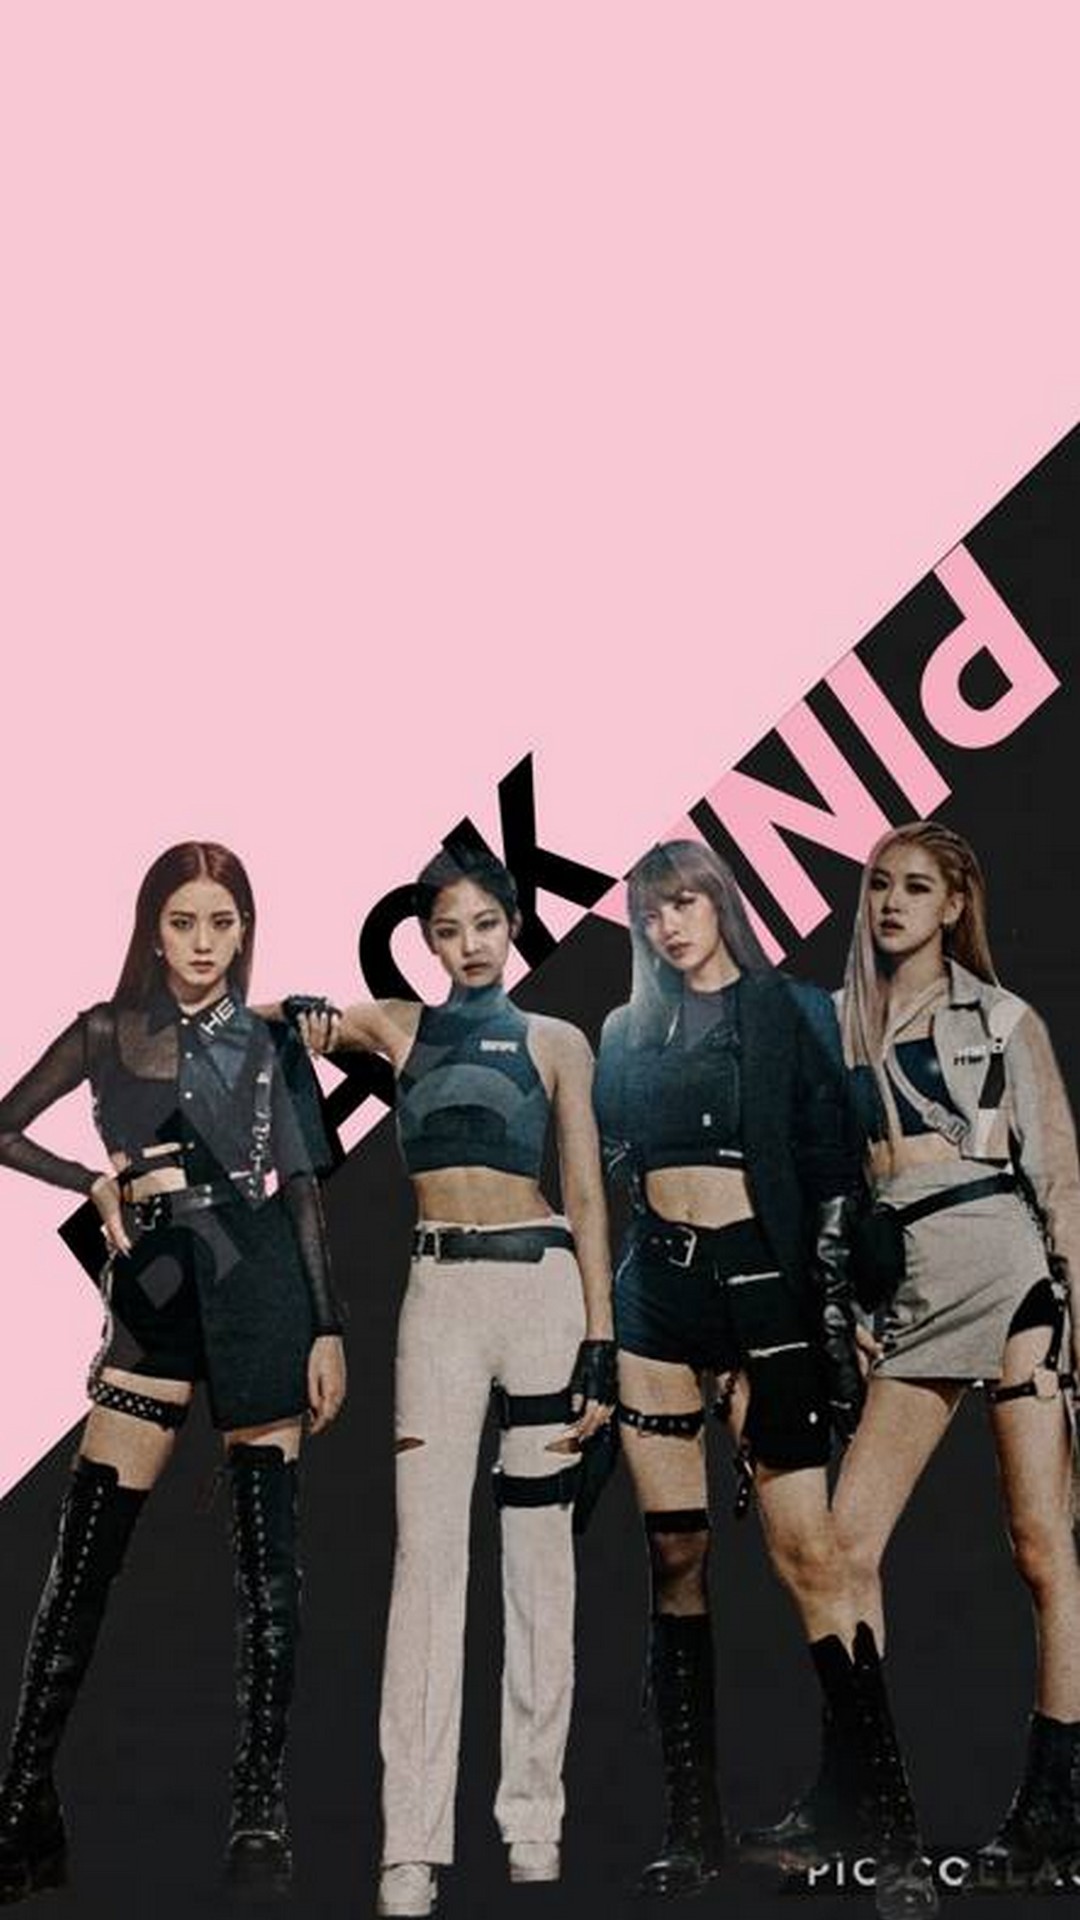 Blackpink Wallpaper For Android With high-resolution 1080X1920 pixel. You can use this wallpaper for your Android backgrounds, Tablet, Samsung Screensavers, Mobile Phone Lock Screen and another Smartphones device